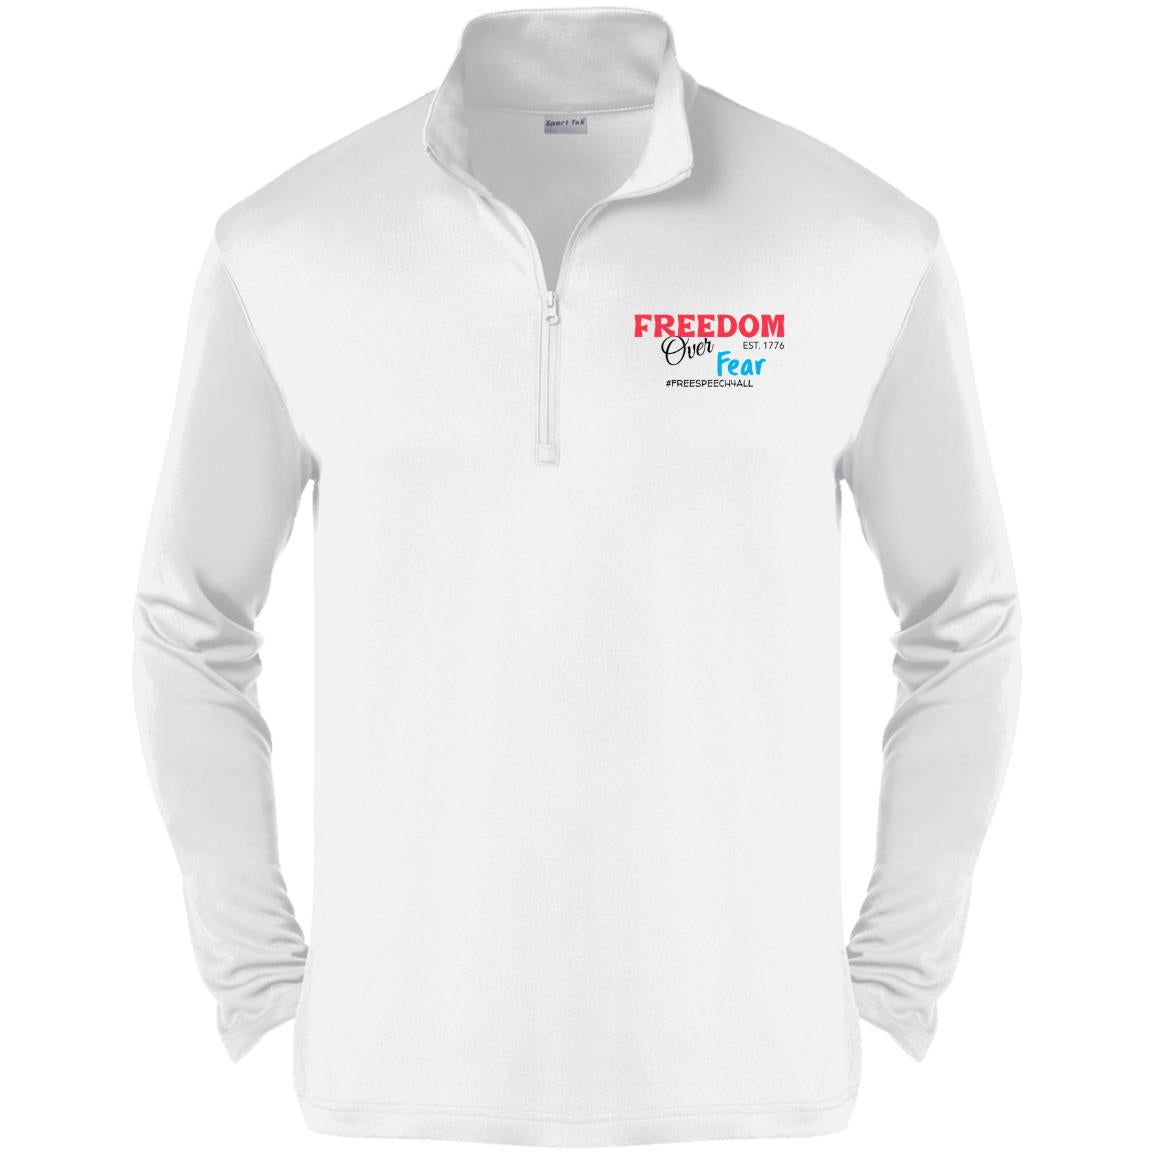 Freedom Over Fear  Competitor 1/4-Zip Pullover